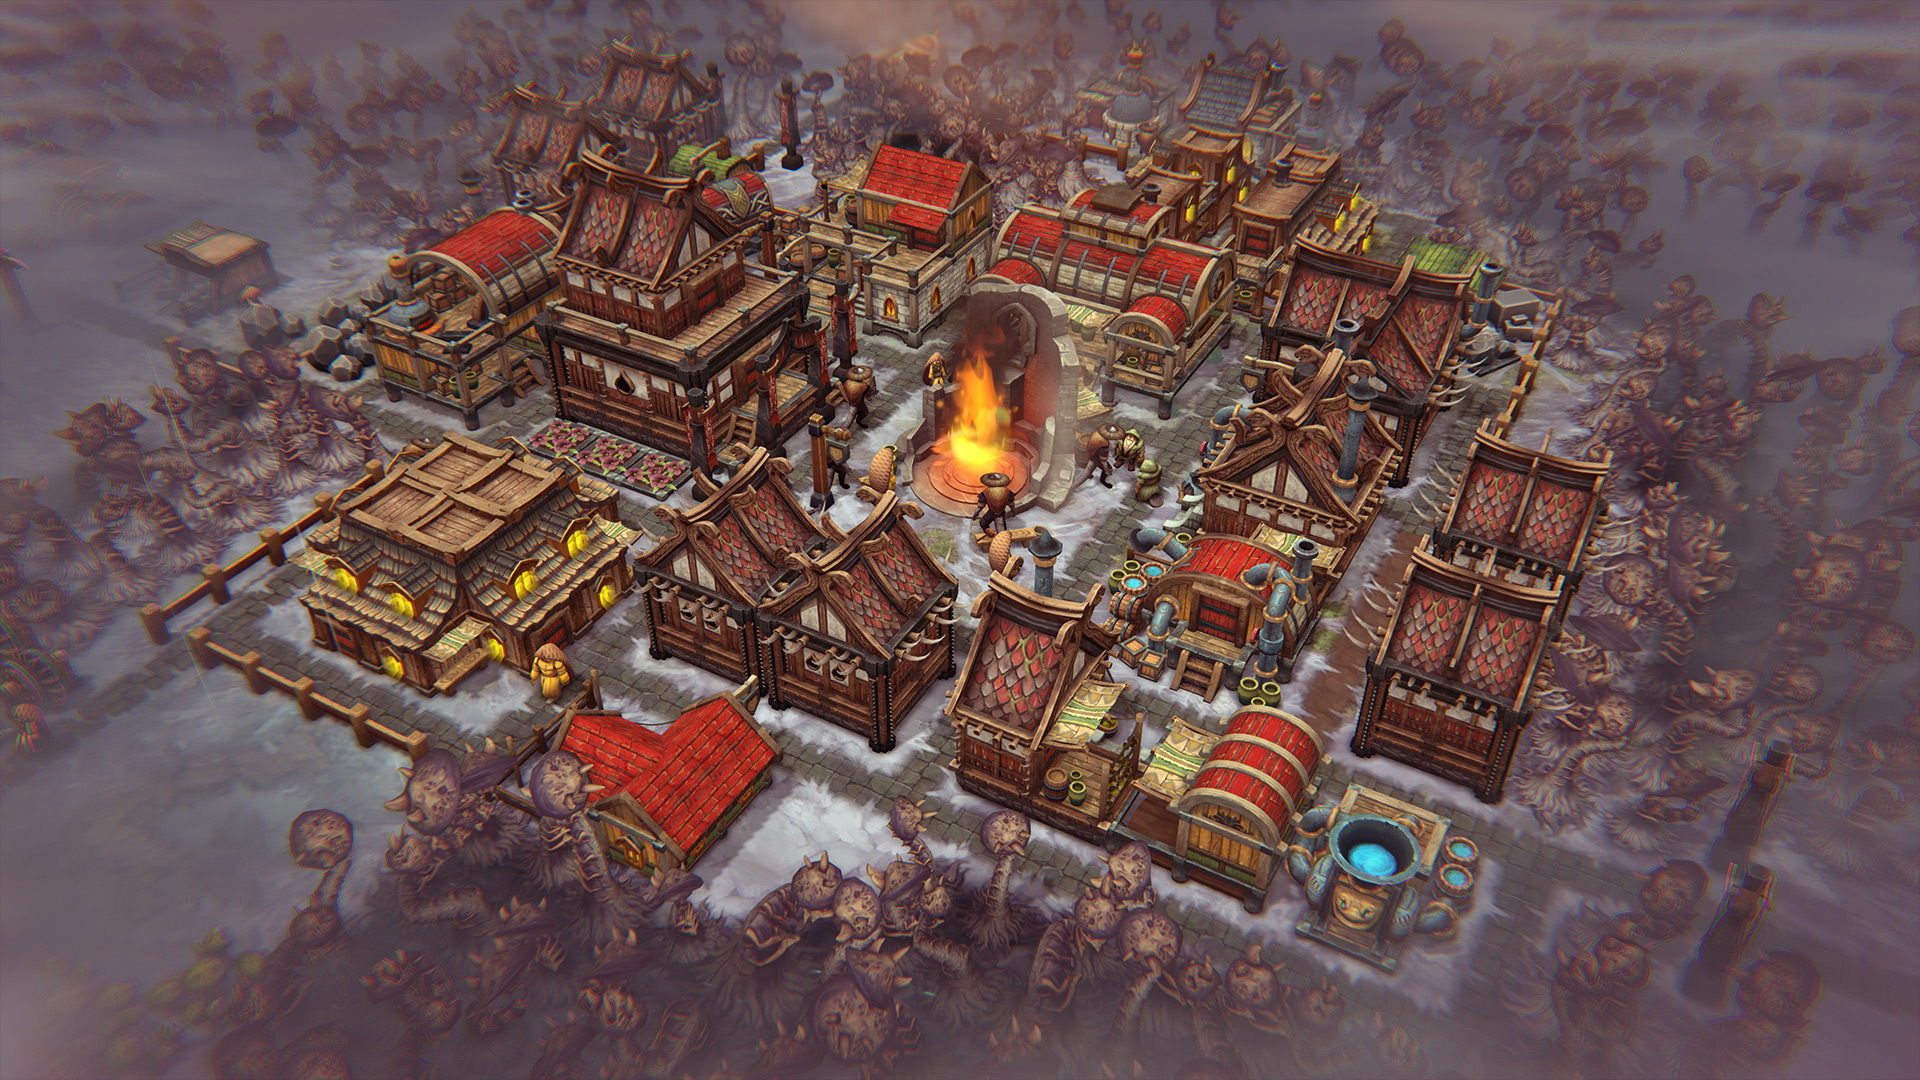 A settlement in Against the Storm. It looks like a small collection of buildings around a large, warm hearth.